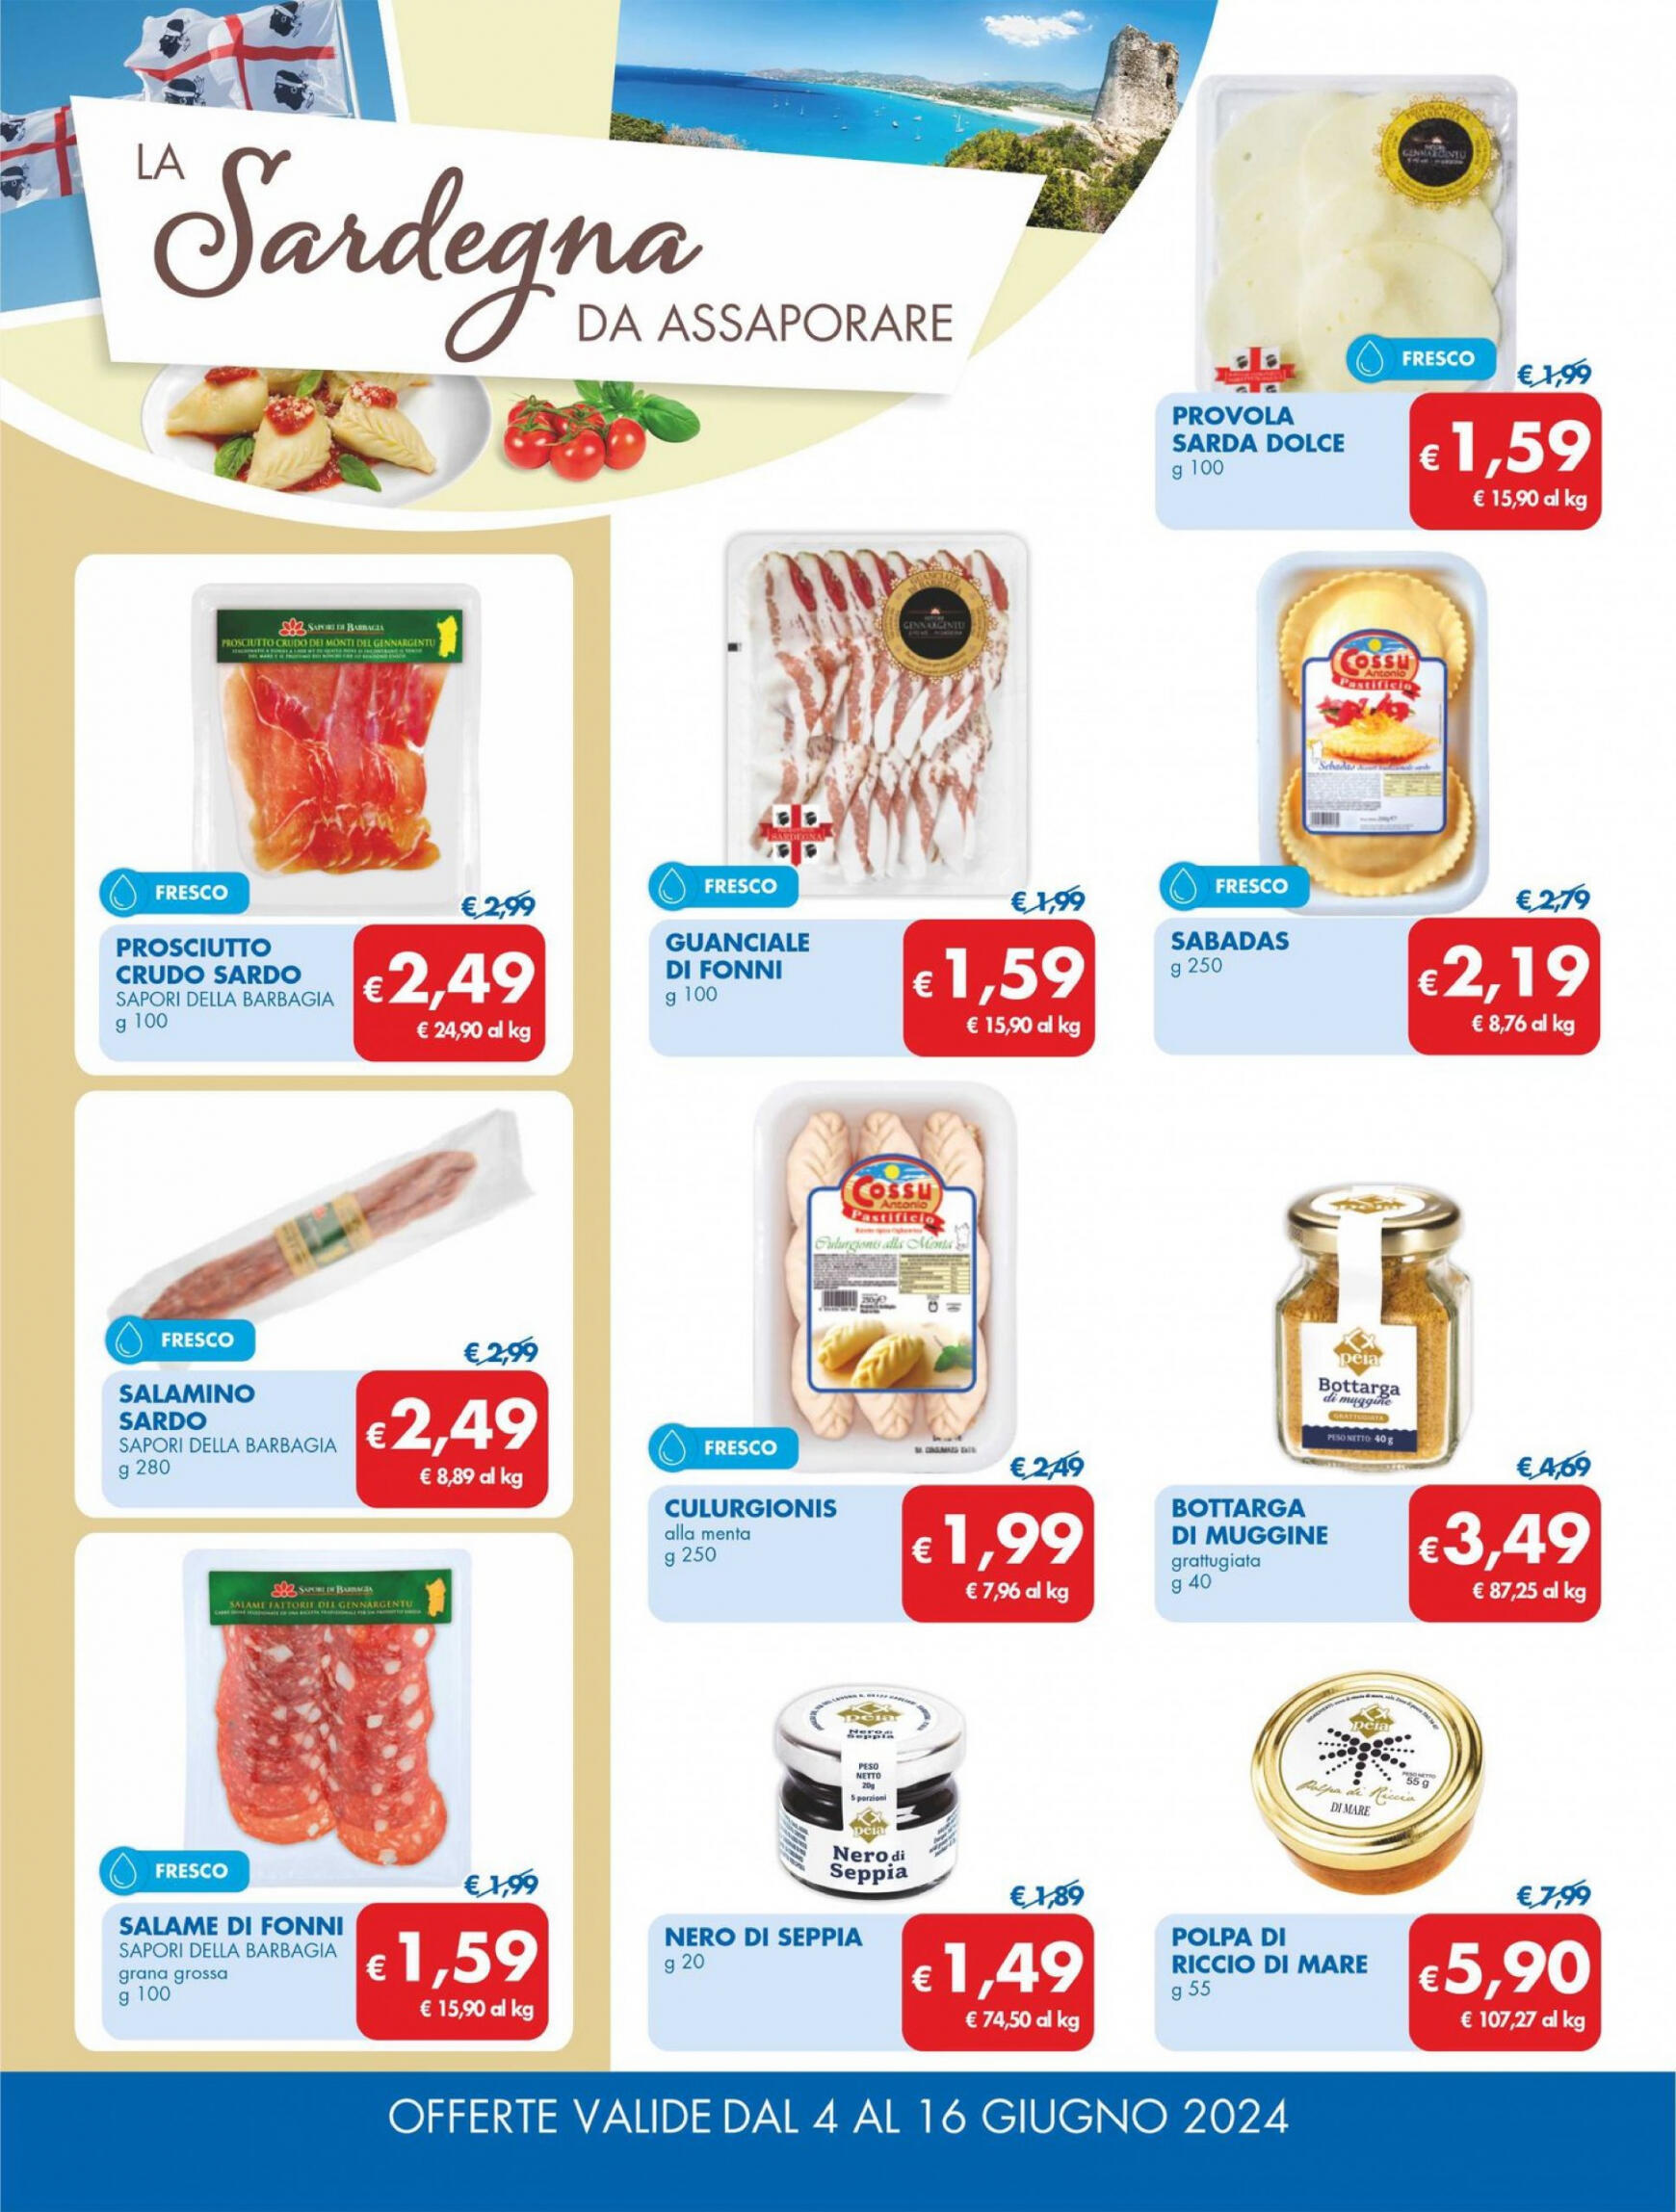 md-discount - Nuovo volantino MD 04.06. - 16.06. - page: 15